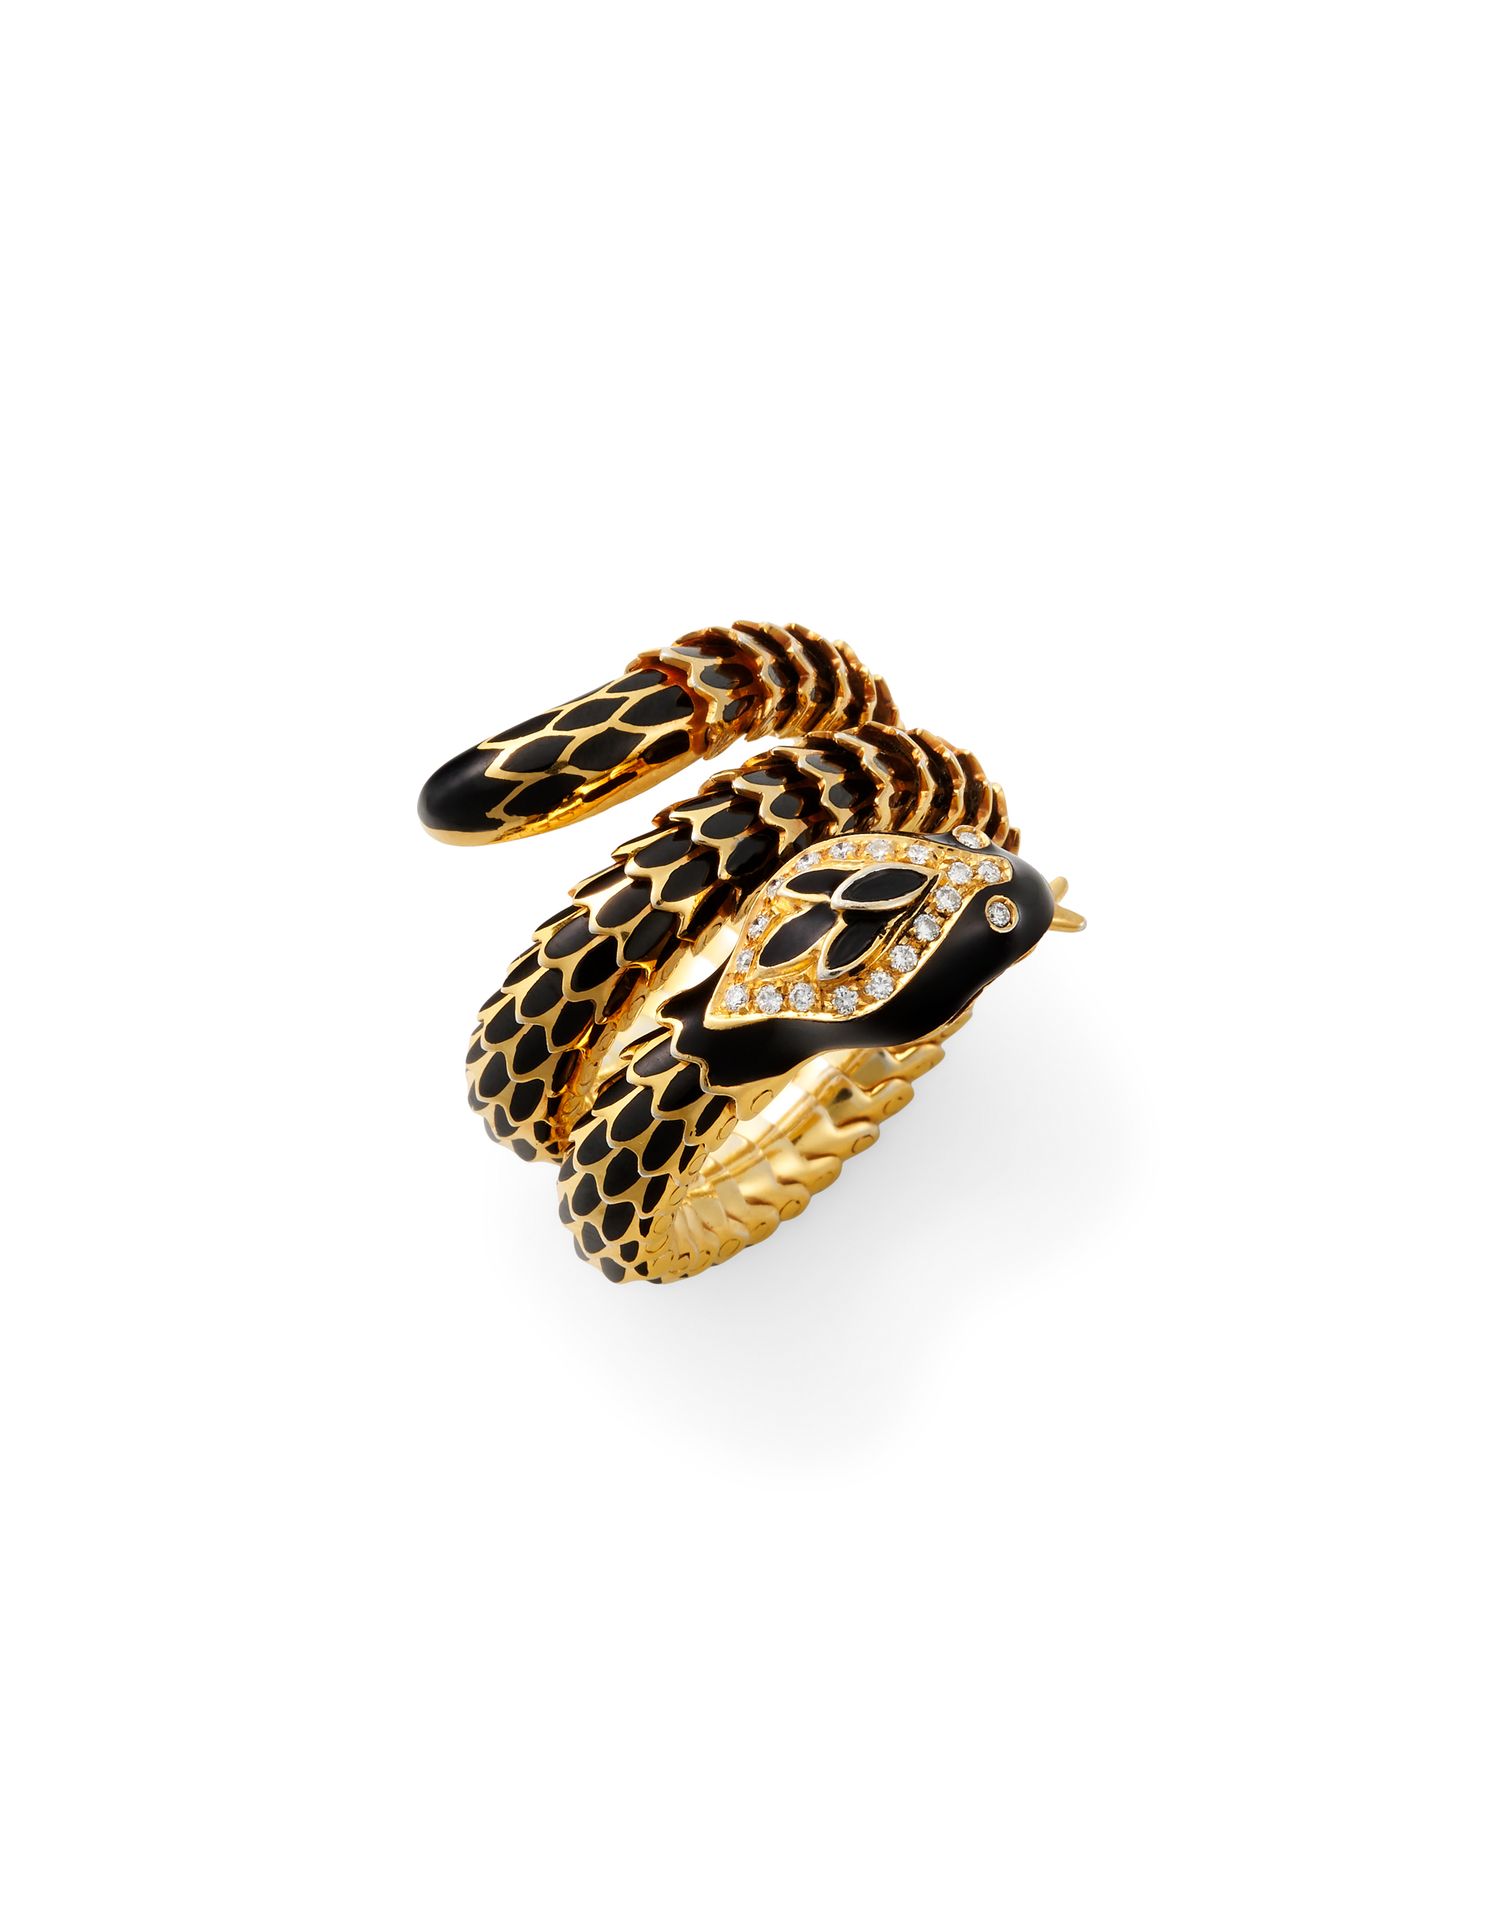 Null DIVALENZA SNAKE RING In 18K yellow gold and black enamel, set with brillian&hellip;